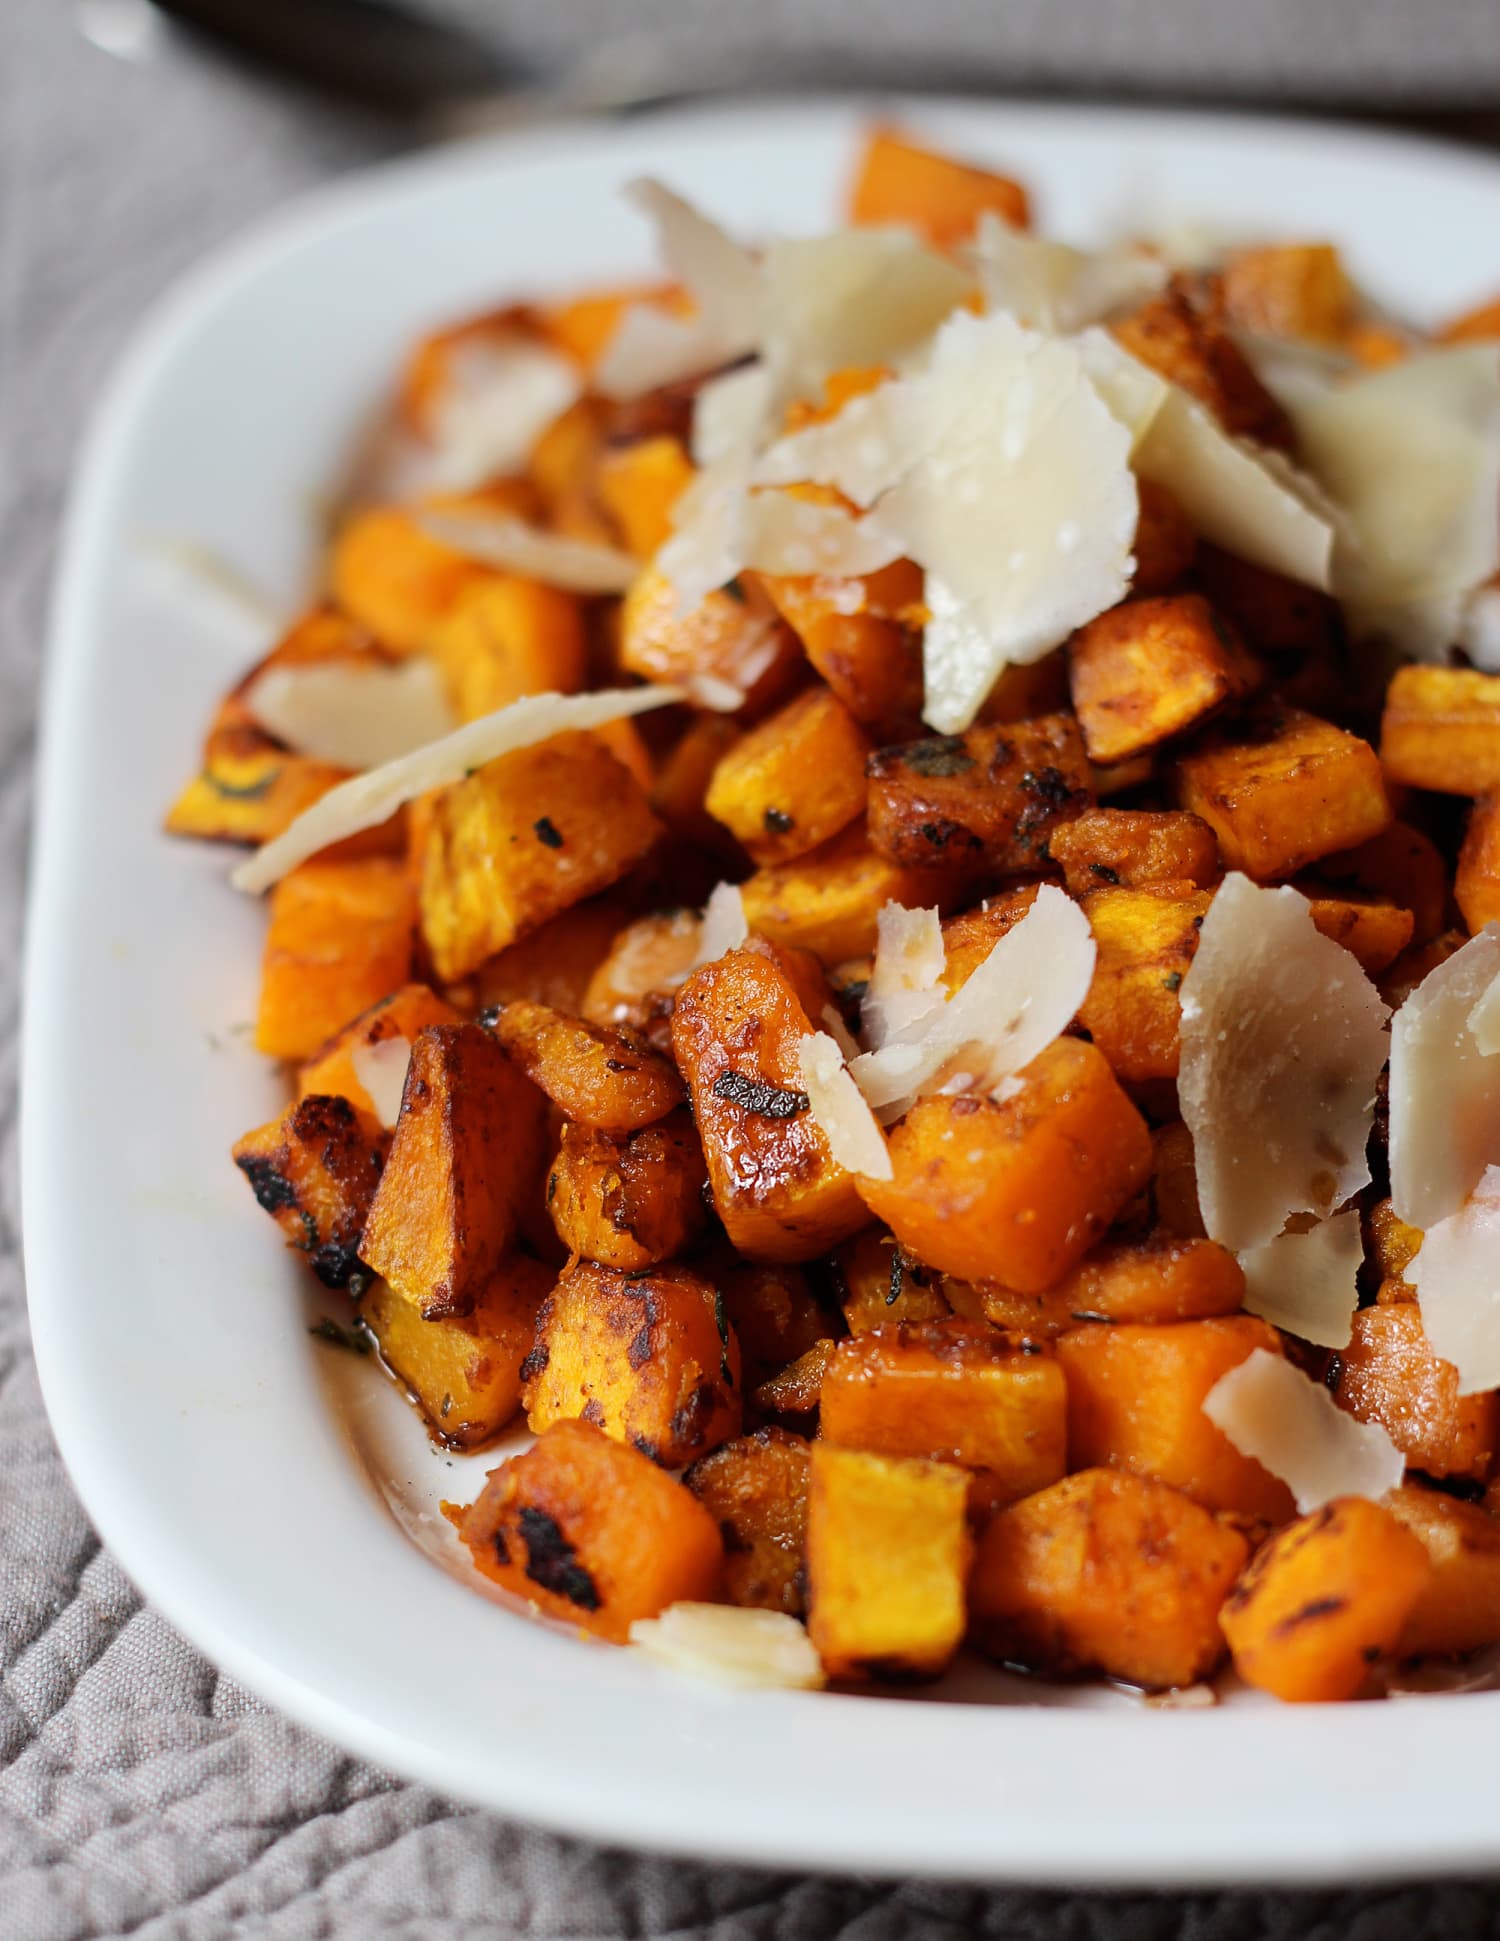 Pan-Seared Butternut Squash with Balsamic & Parmigiano Shards